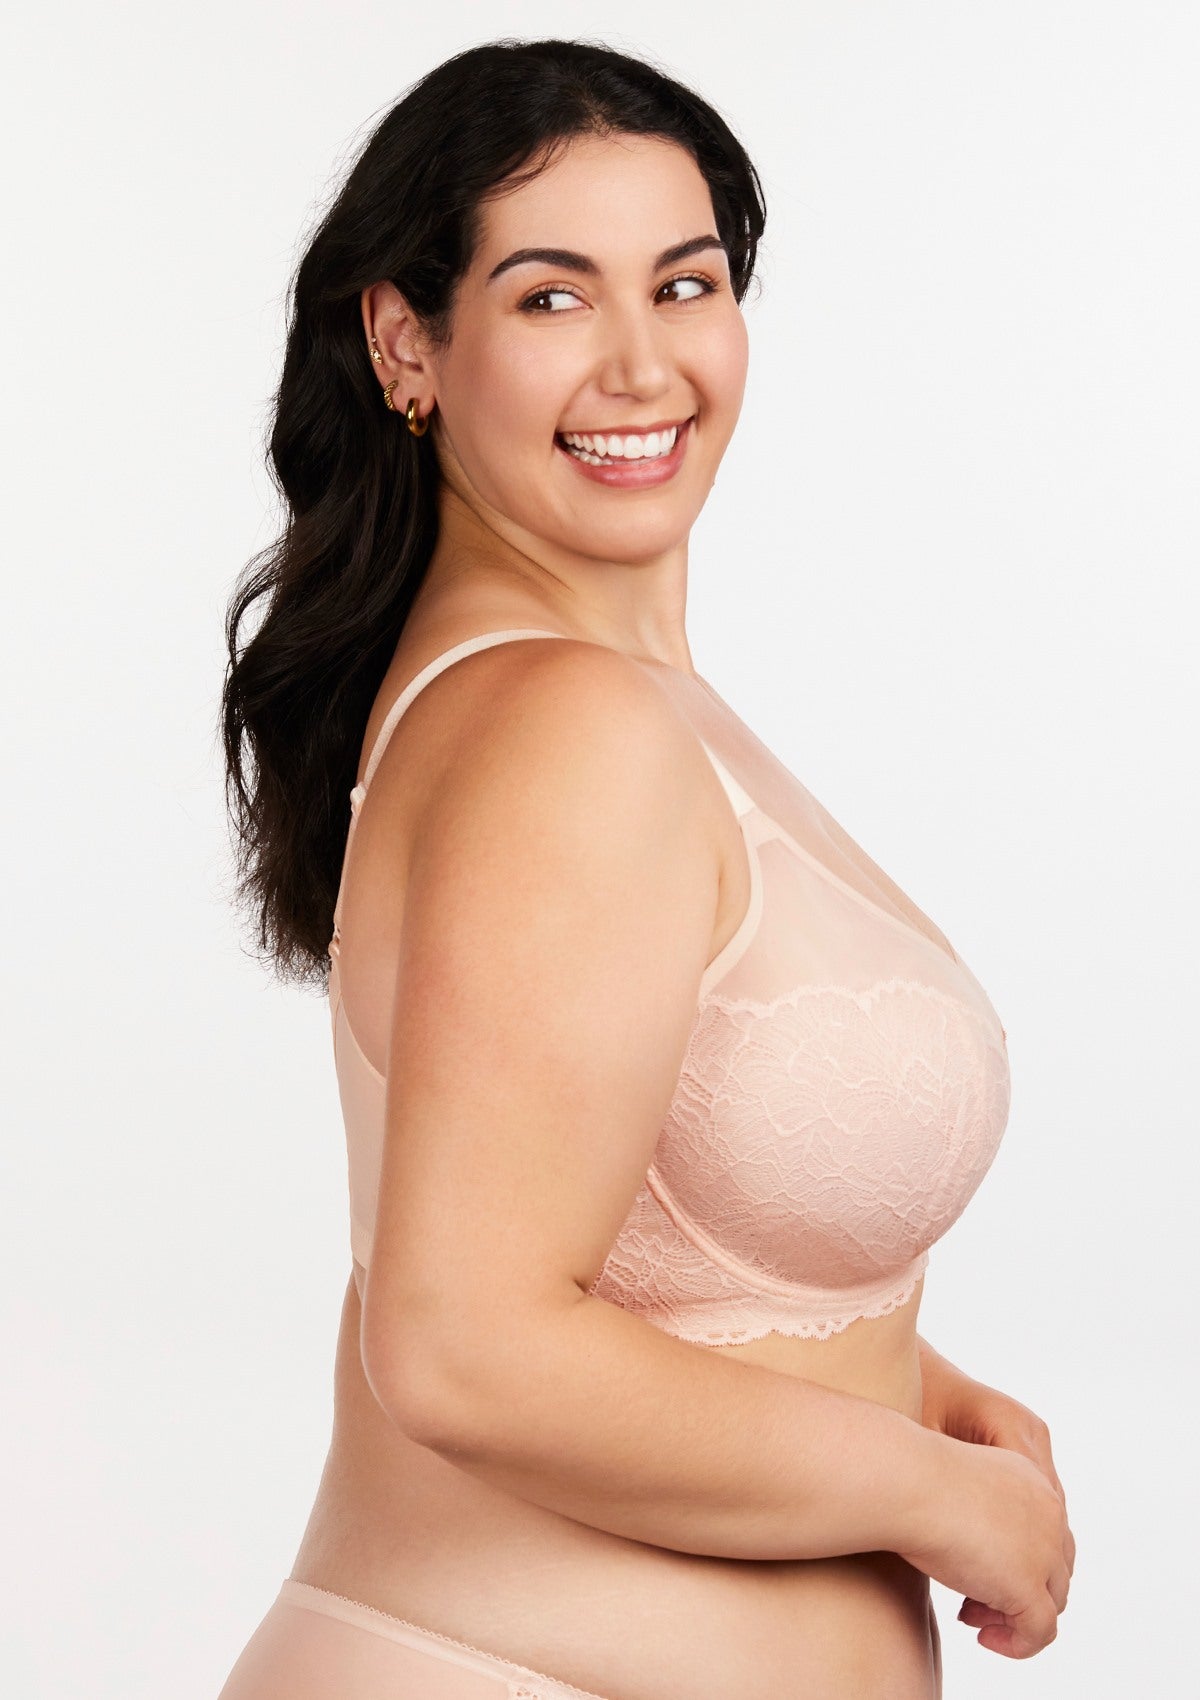 HSIA Blossom Sheer Lace Bra: Comfortable Underwire Bra For Big Busts - Dusty Peach / 34 / C